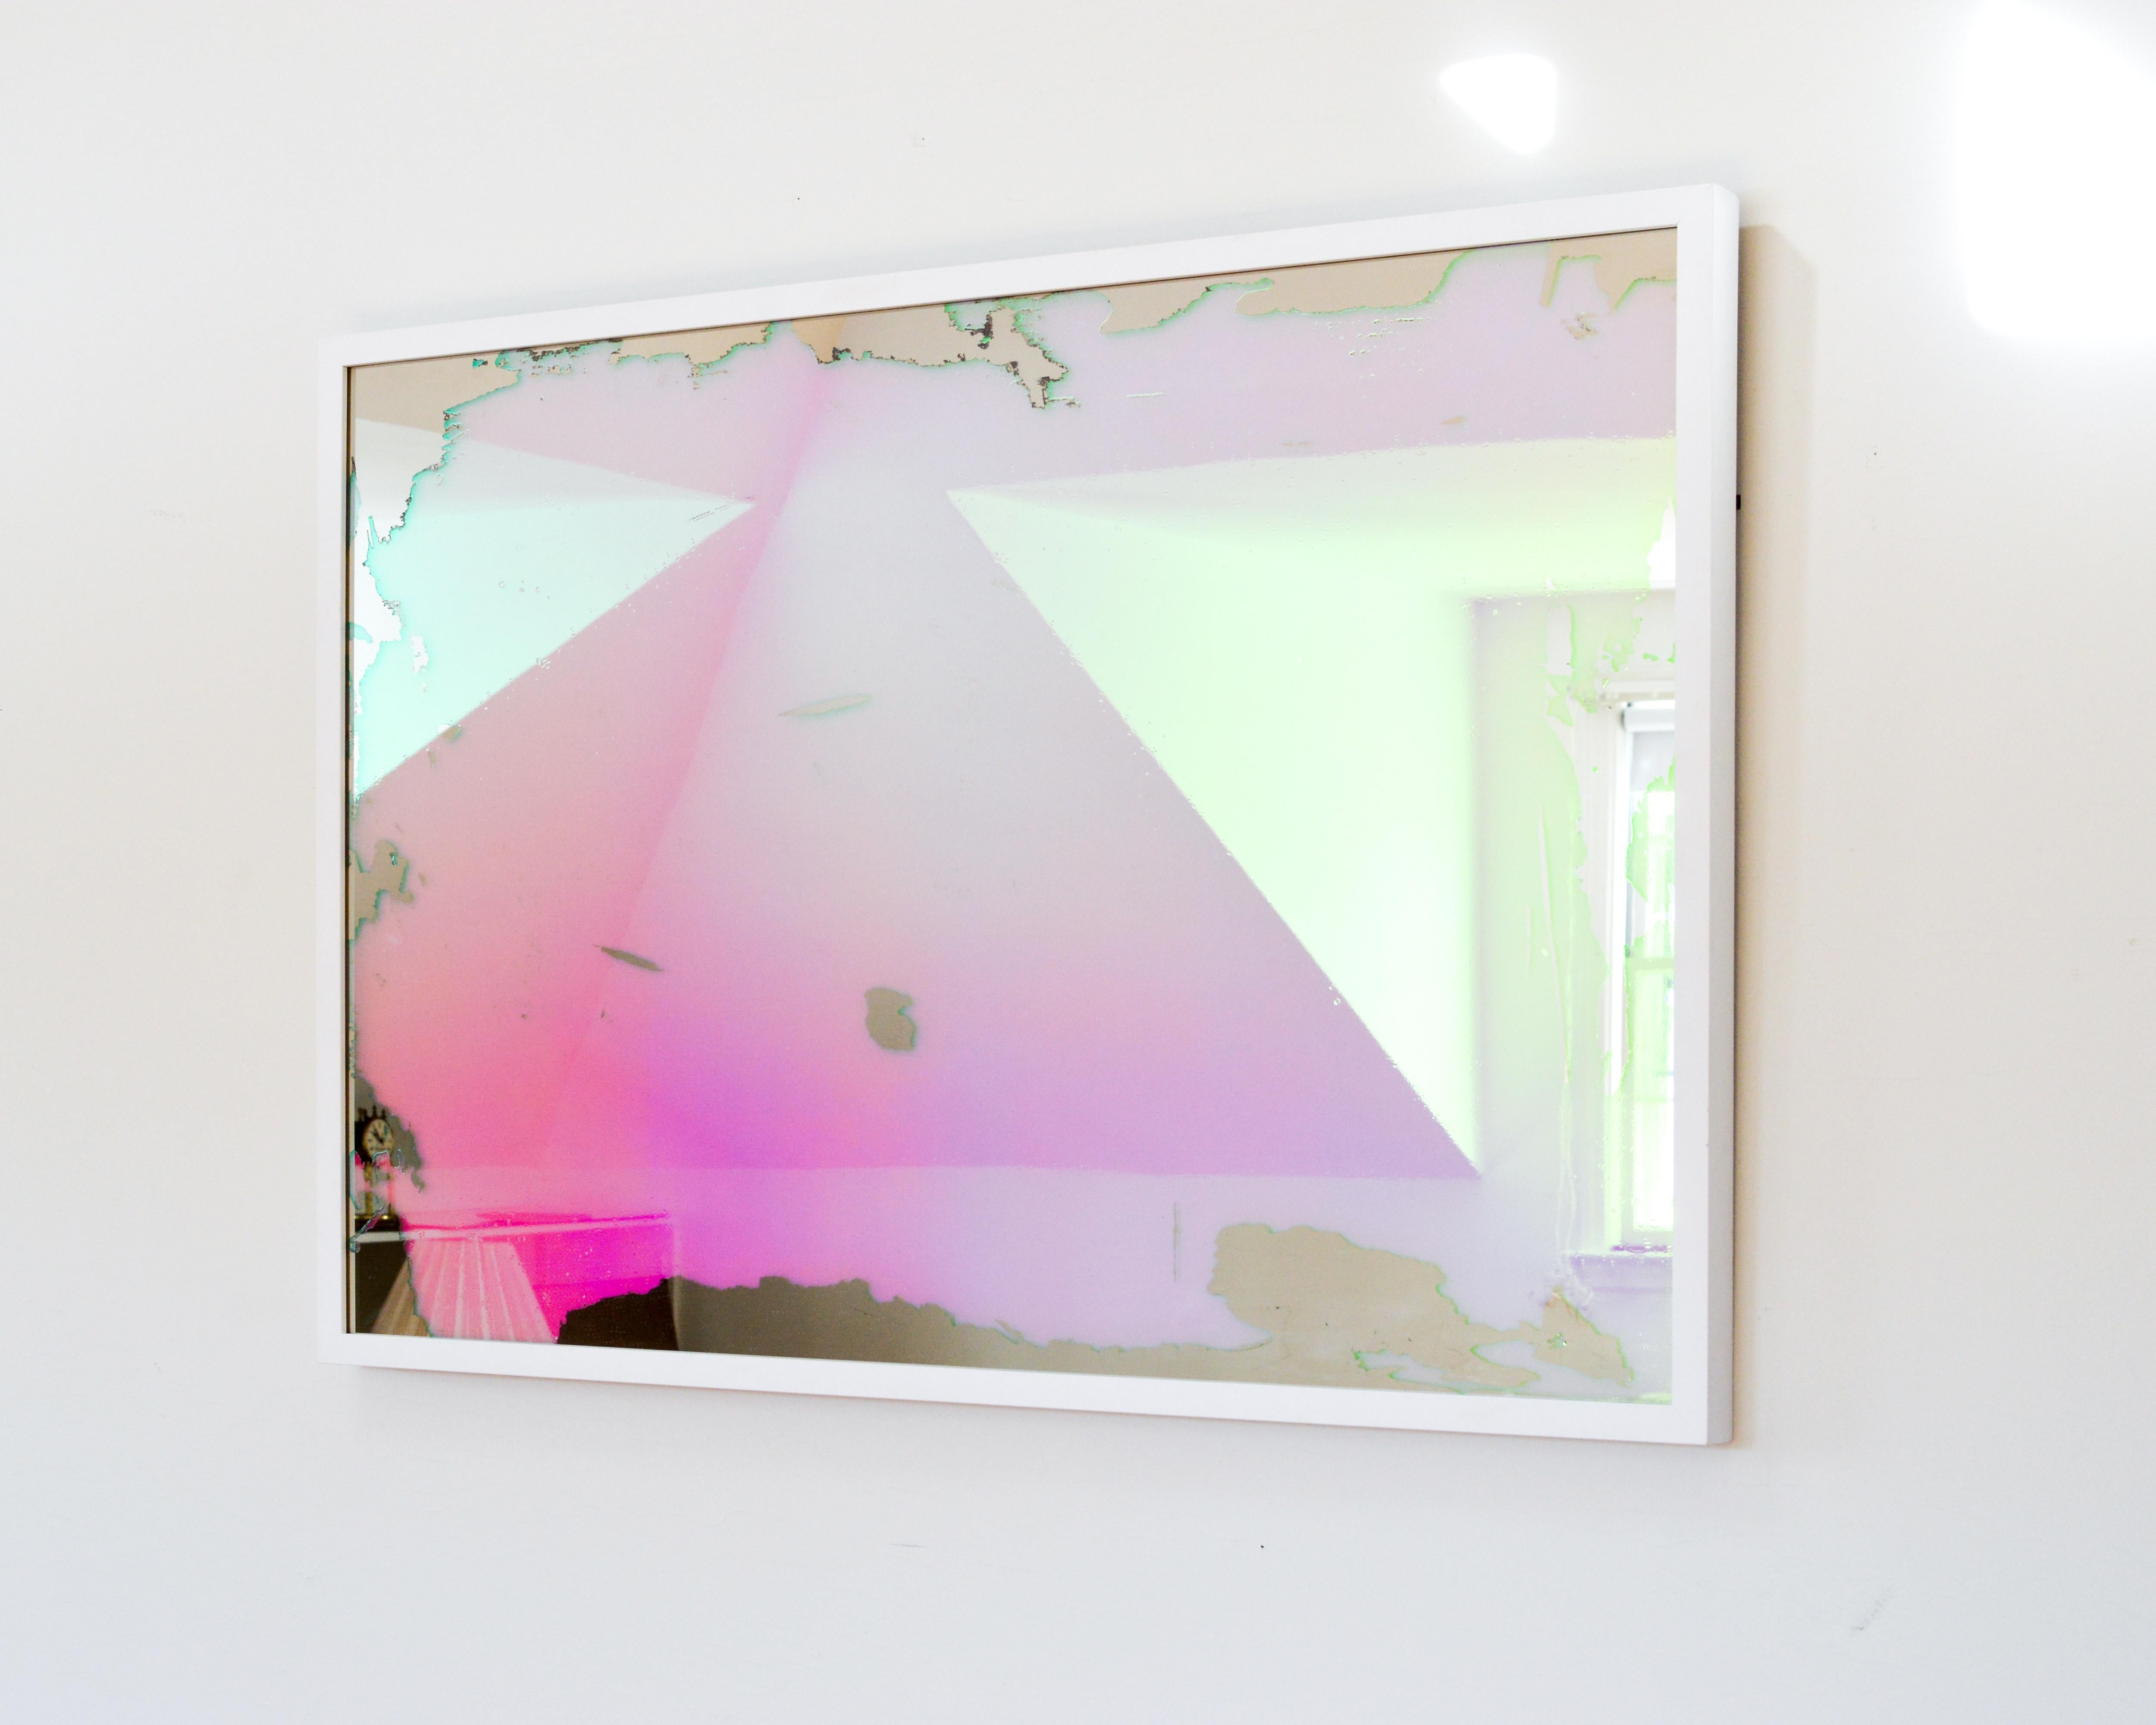 This contemporary piece is made with dichroic film on mirror and is framed in a modern white frame. The application of the film creates a changing colorful aesthetic so that the viewer sees different colors as they change the angle at which they